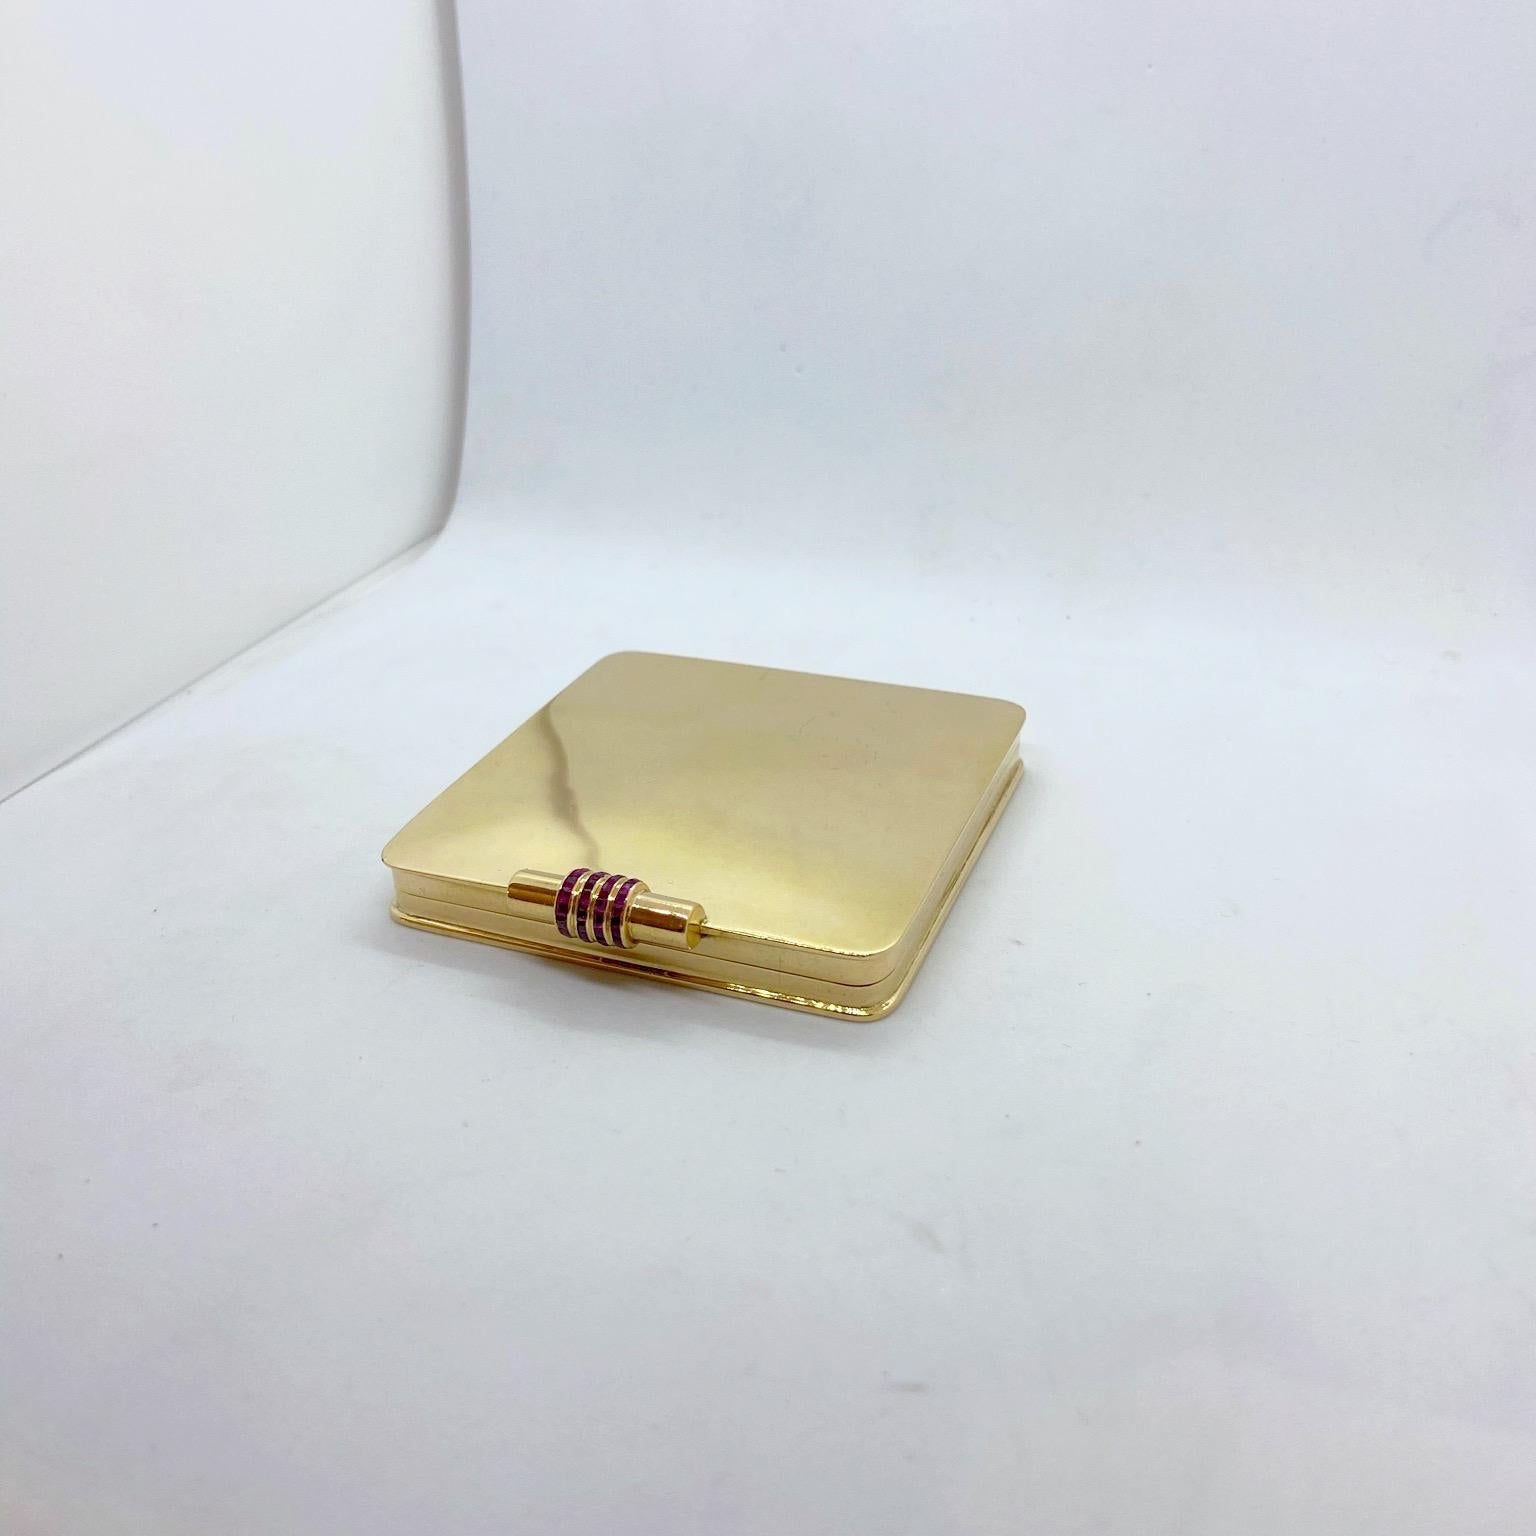 Square Cut Rene Boivin 18 Karat Yellow Gold and Ruby Compact Case, circa 1940 For Sale